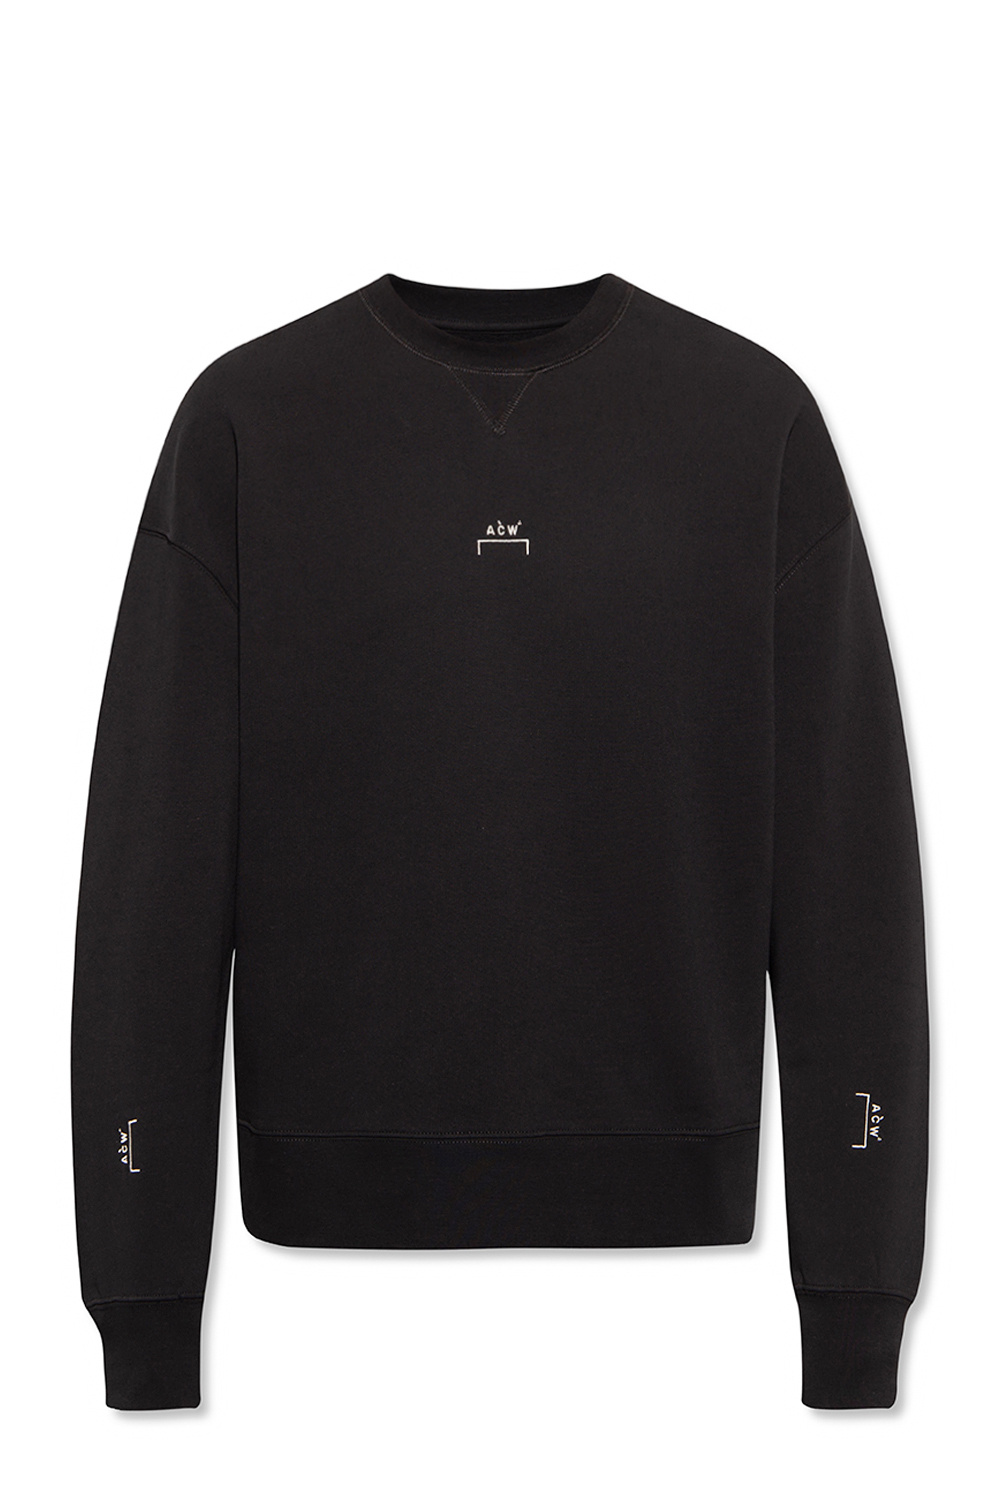 A-COLD-WALL* Sweatshirt Courtes with logo